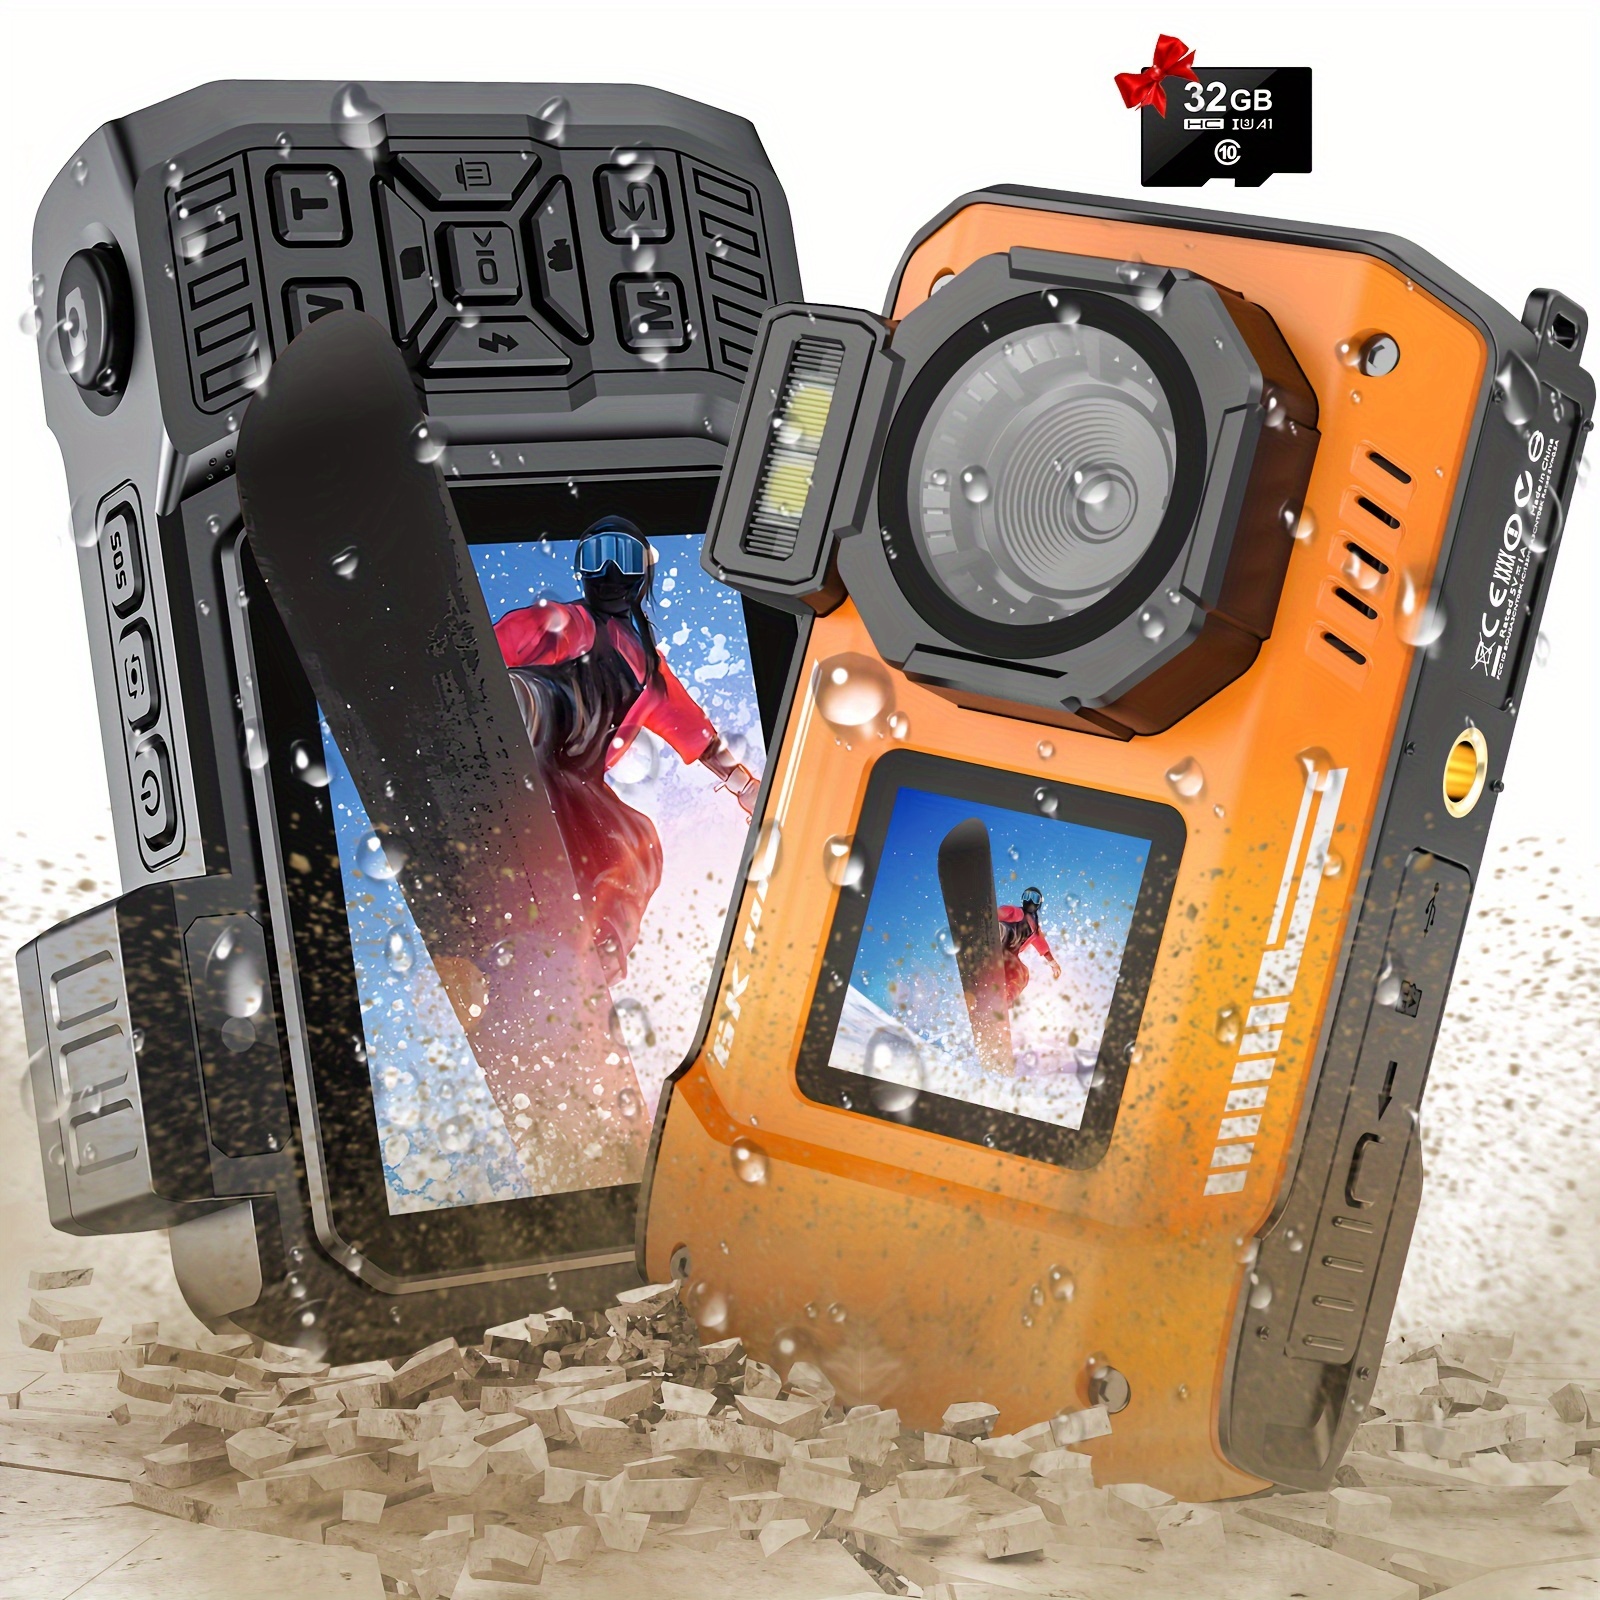 

Ultimate 8k Adventure Camera: Capture Every Moment In Stunning Detail!